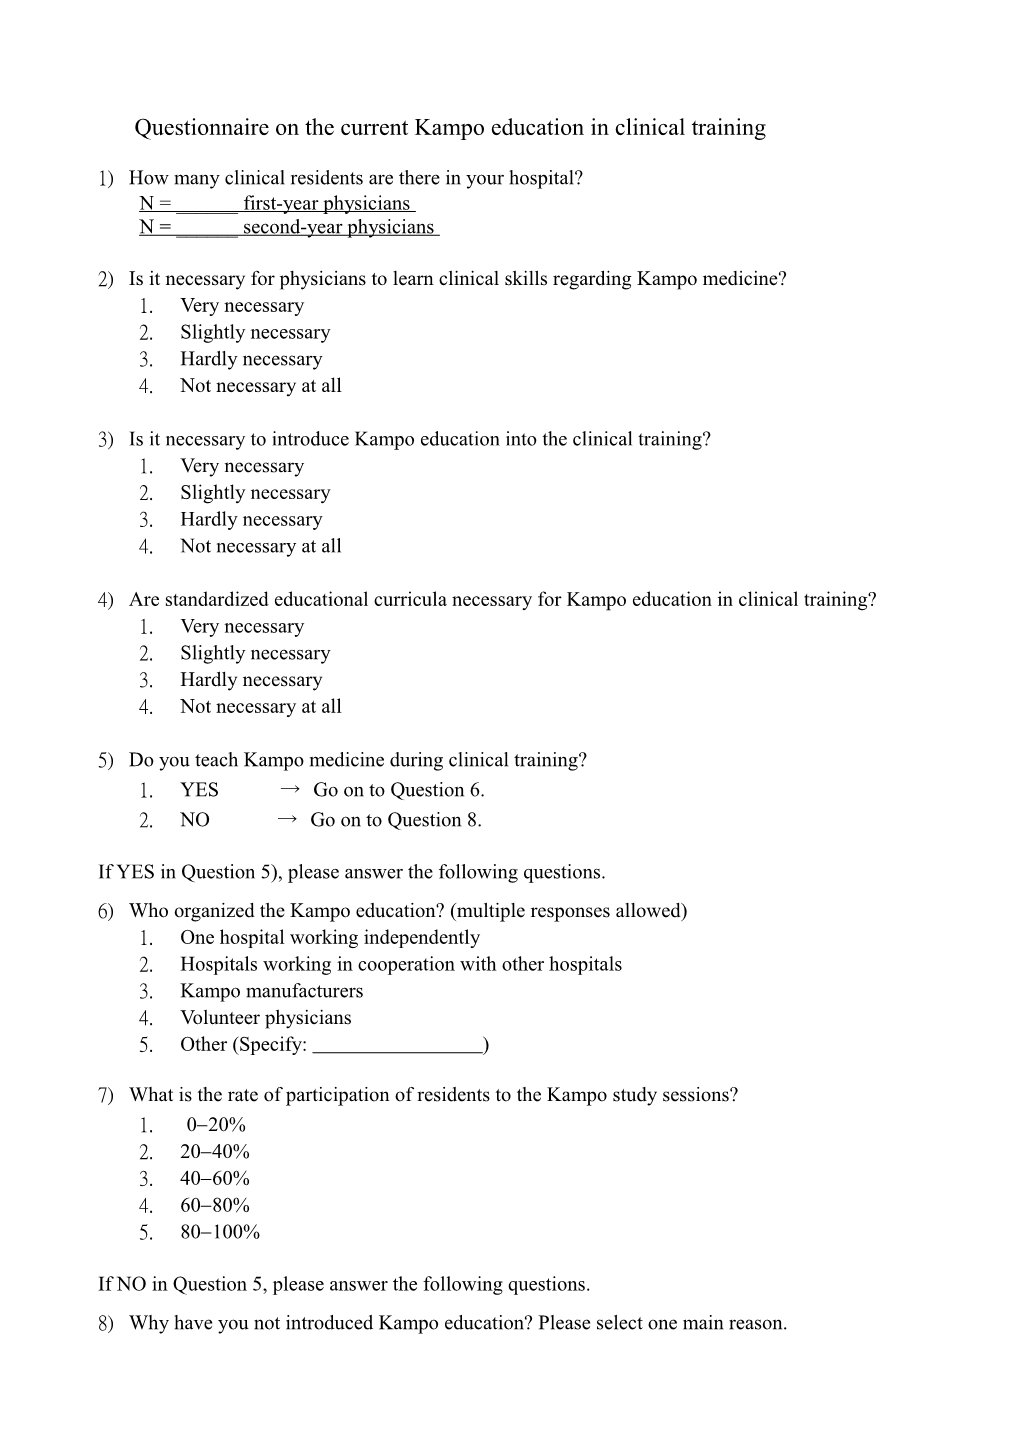 Questionnaire on the Current Kampo Education in Clinical Training